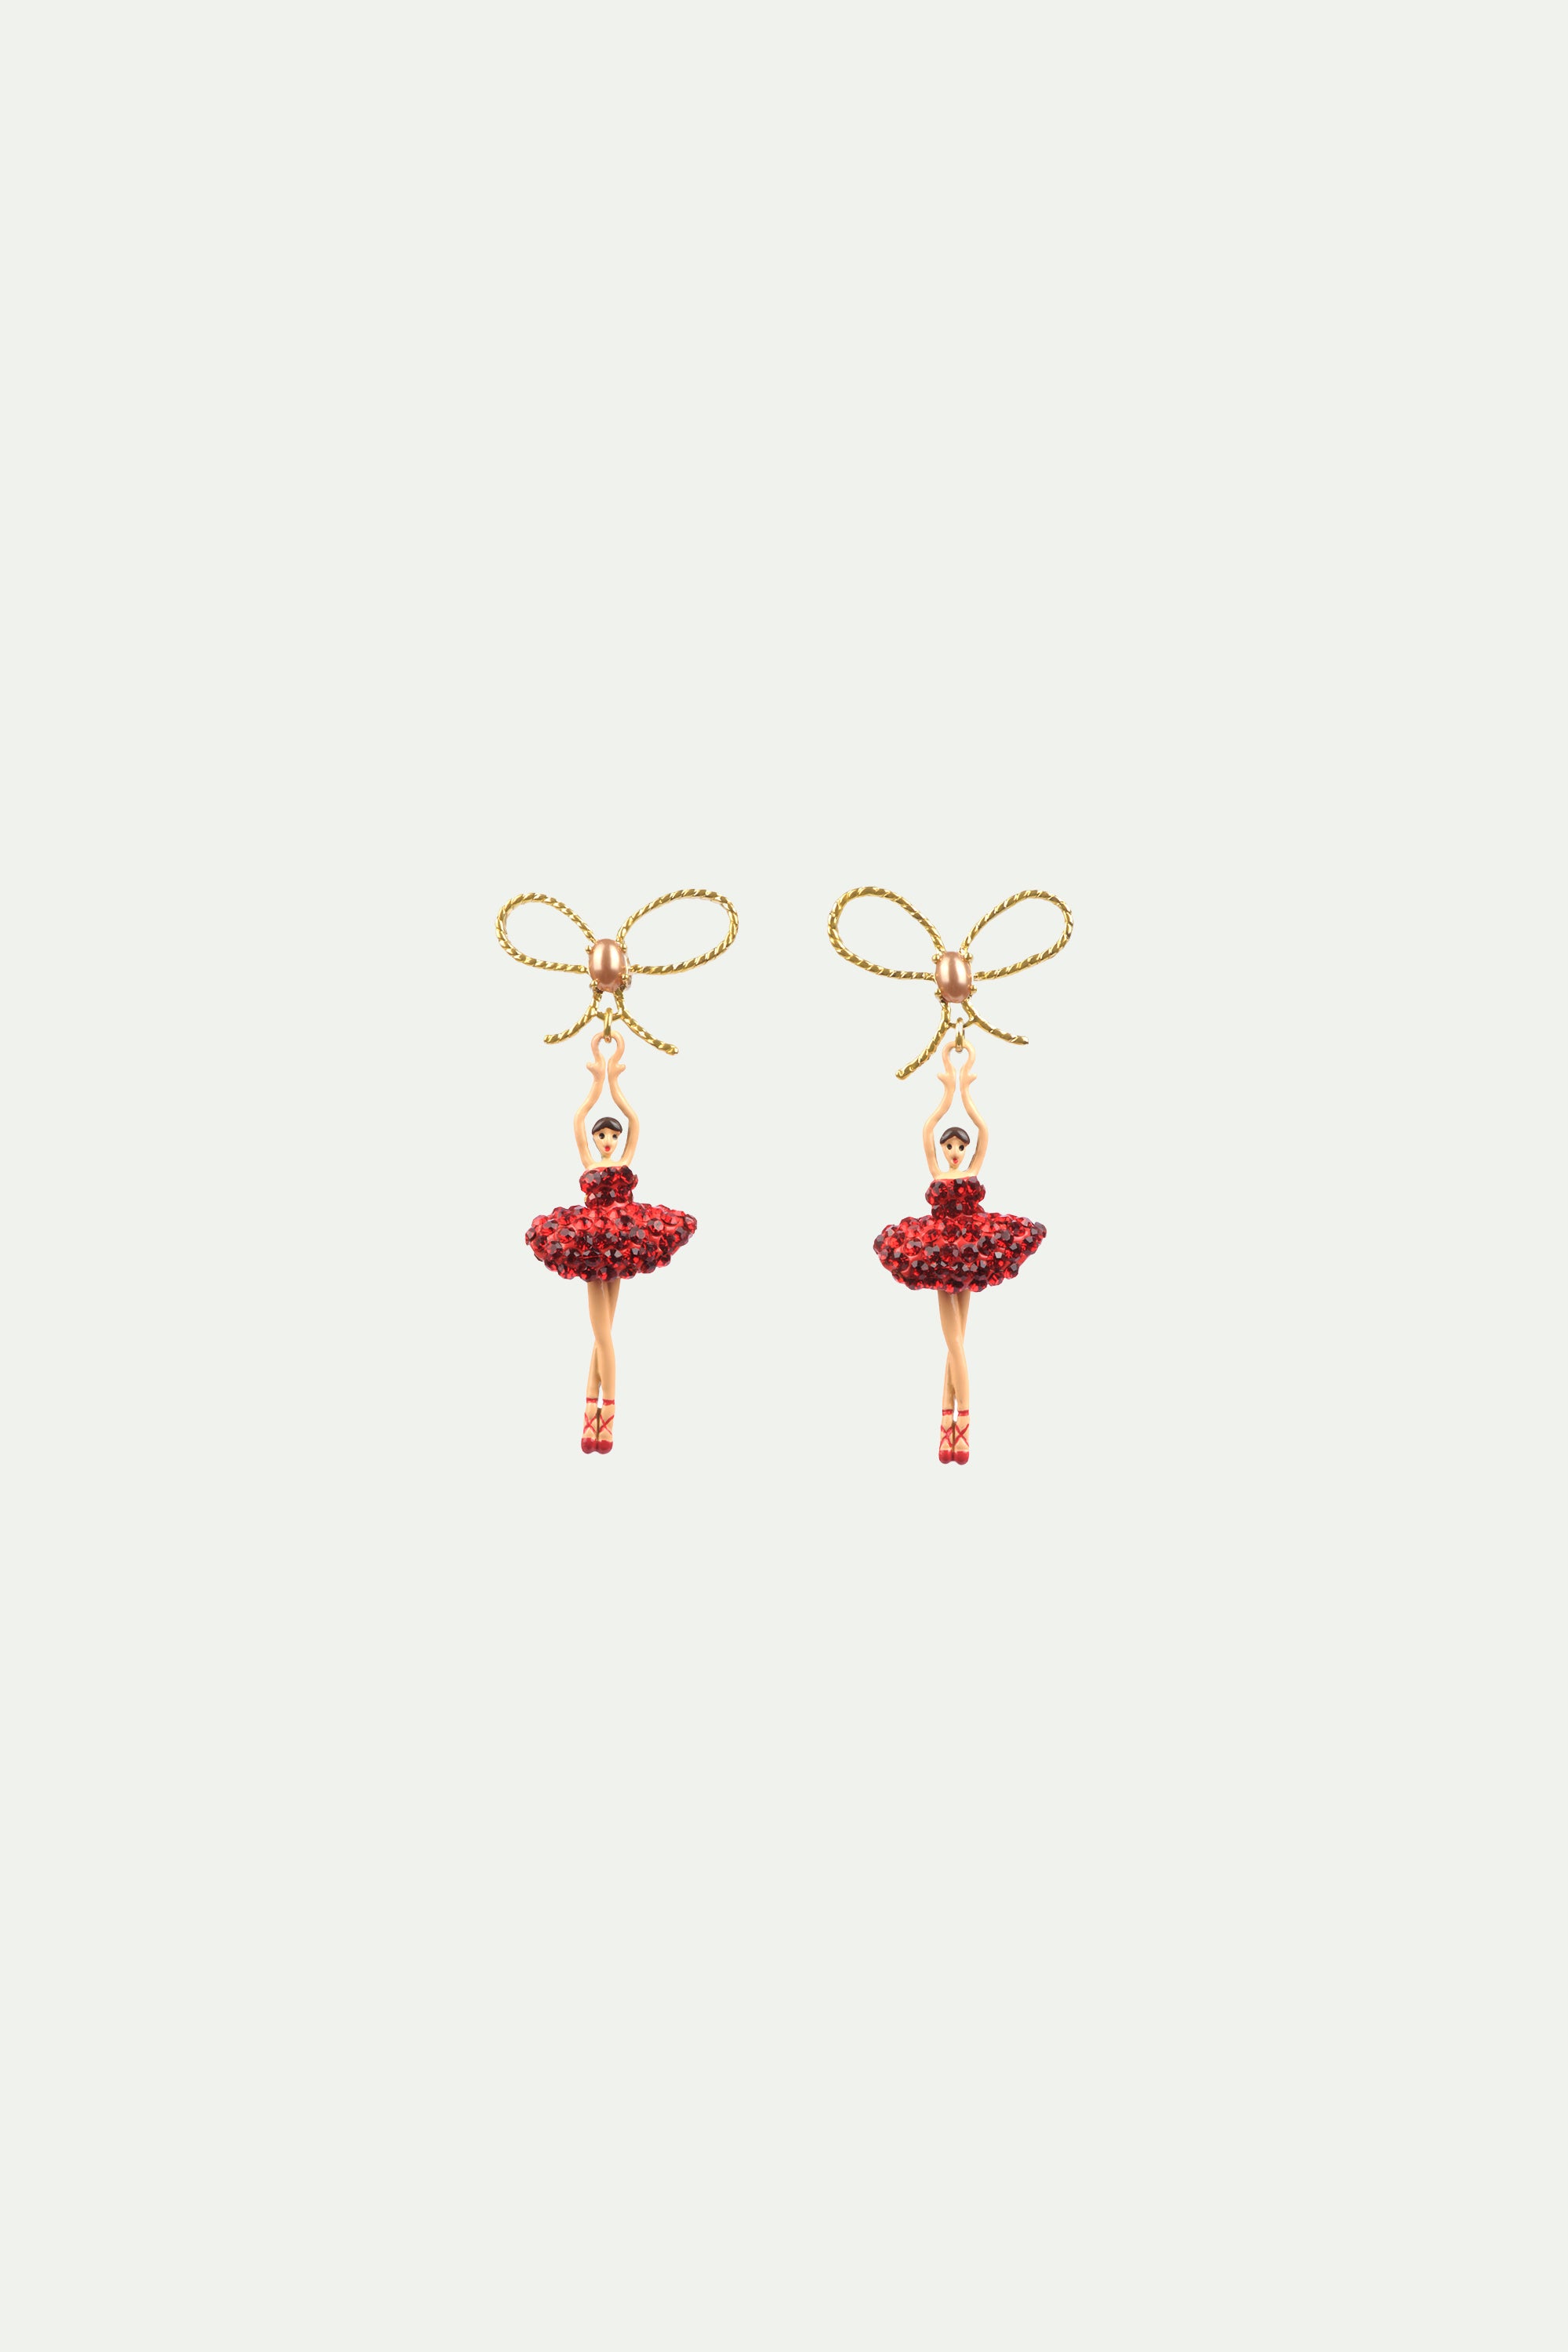 Asymmetrical Clip on earrings ballerina with tutu paved with red rhinestones